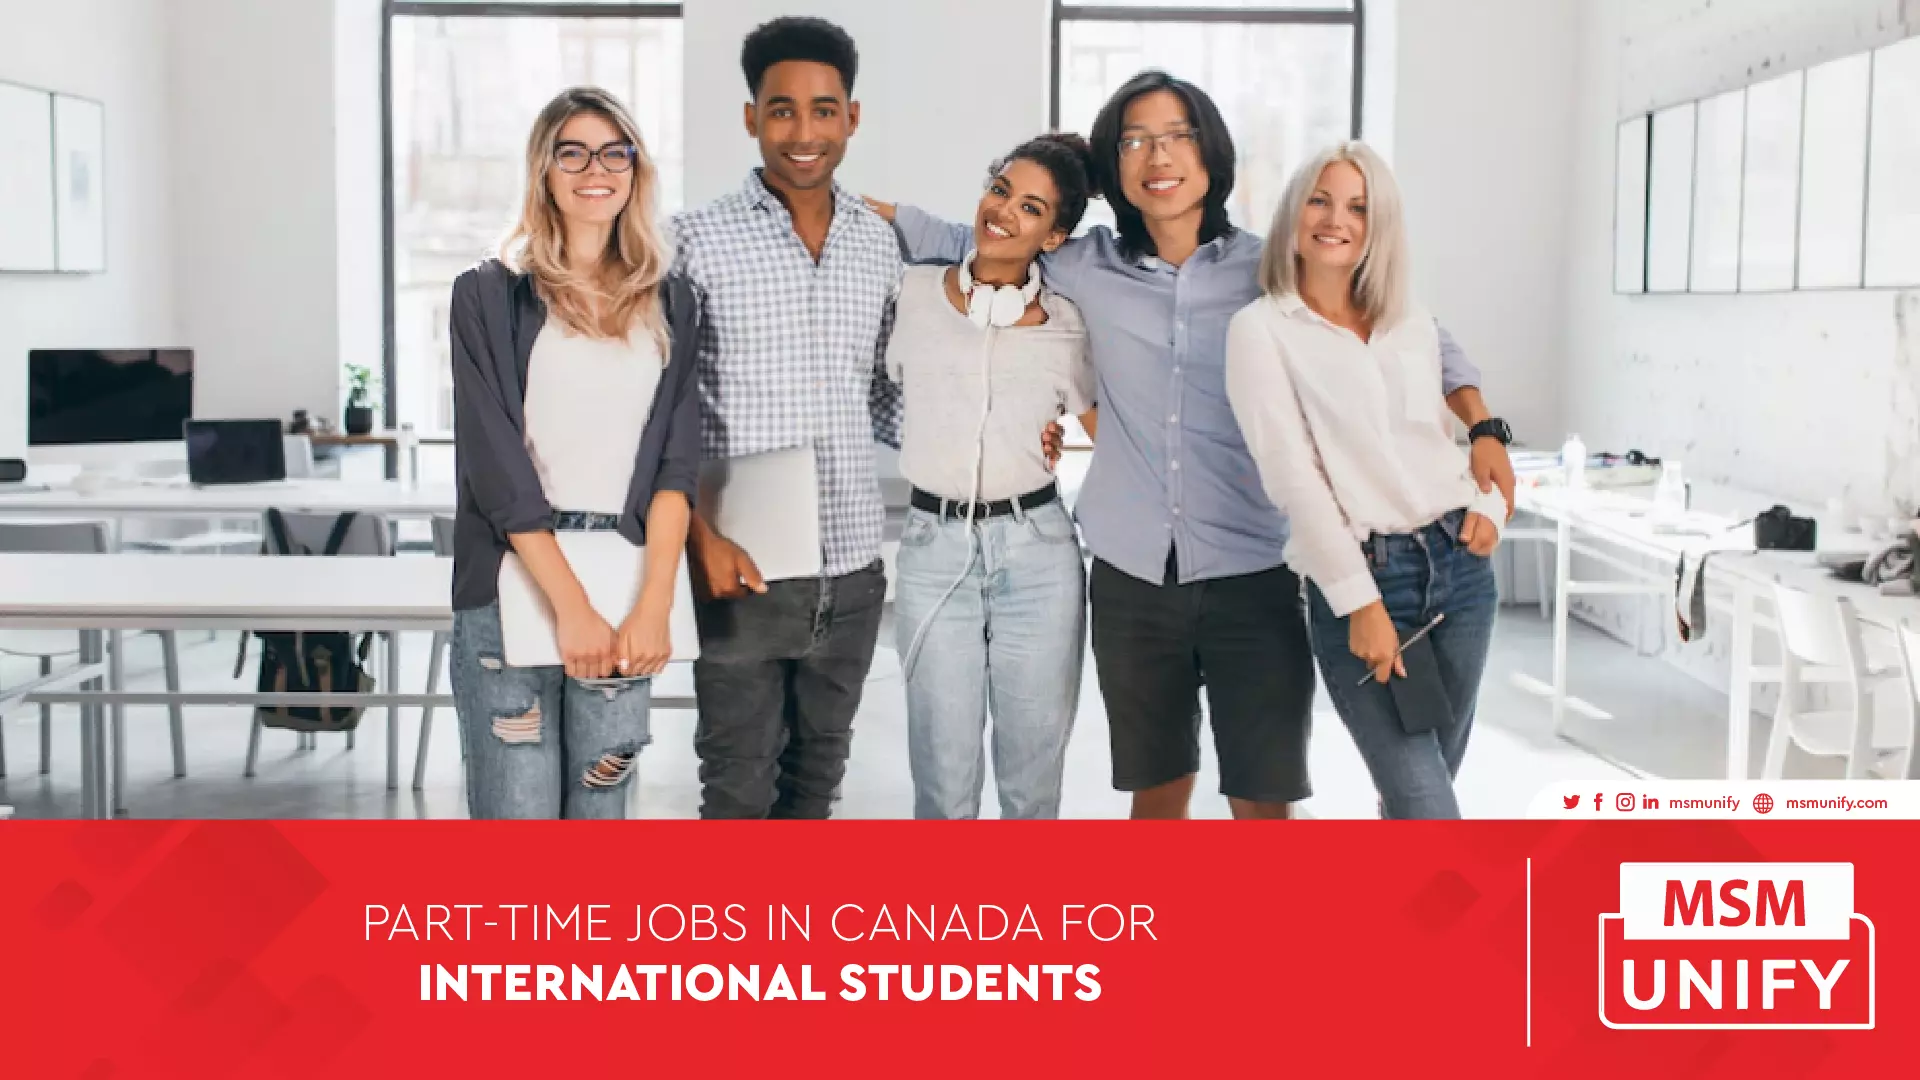 122022 MSM Unify Part time Jobs in Canada for International Students 01 1